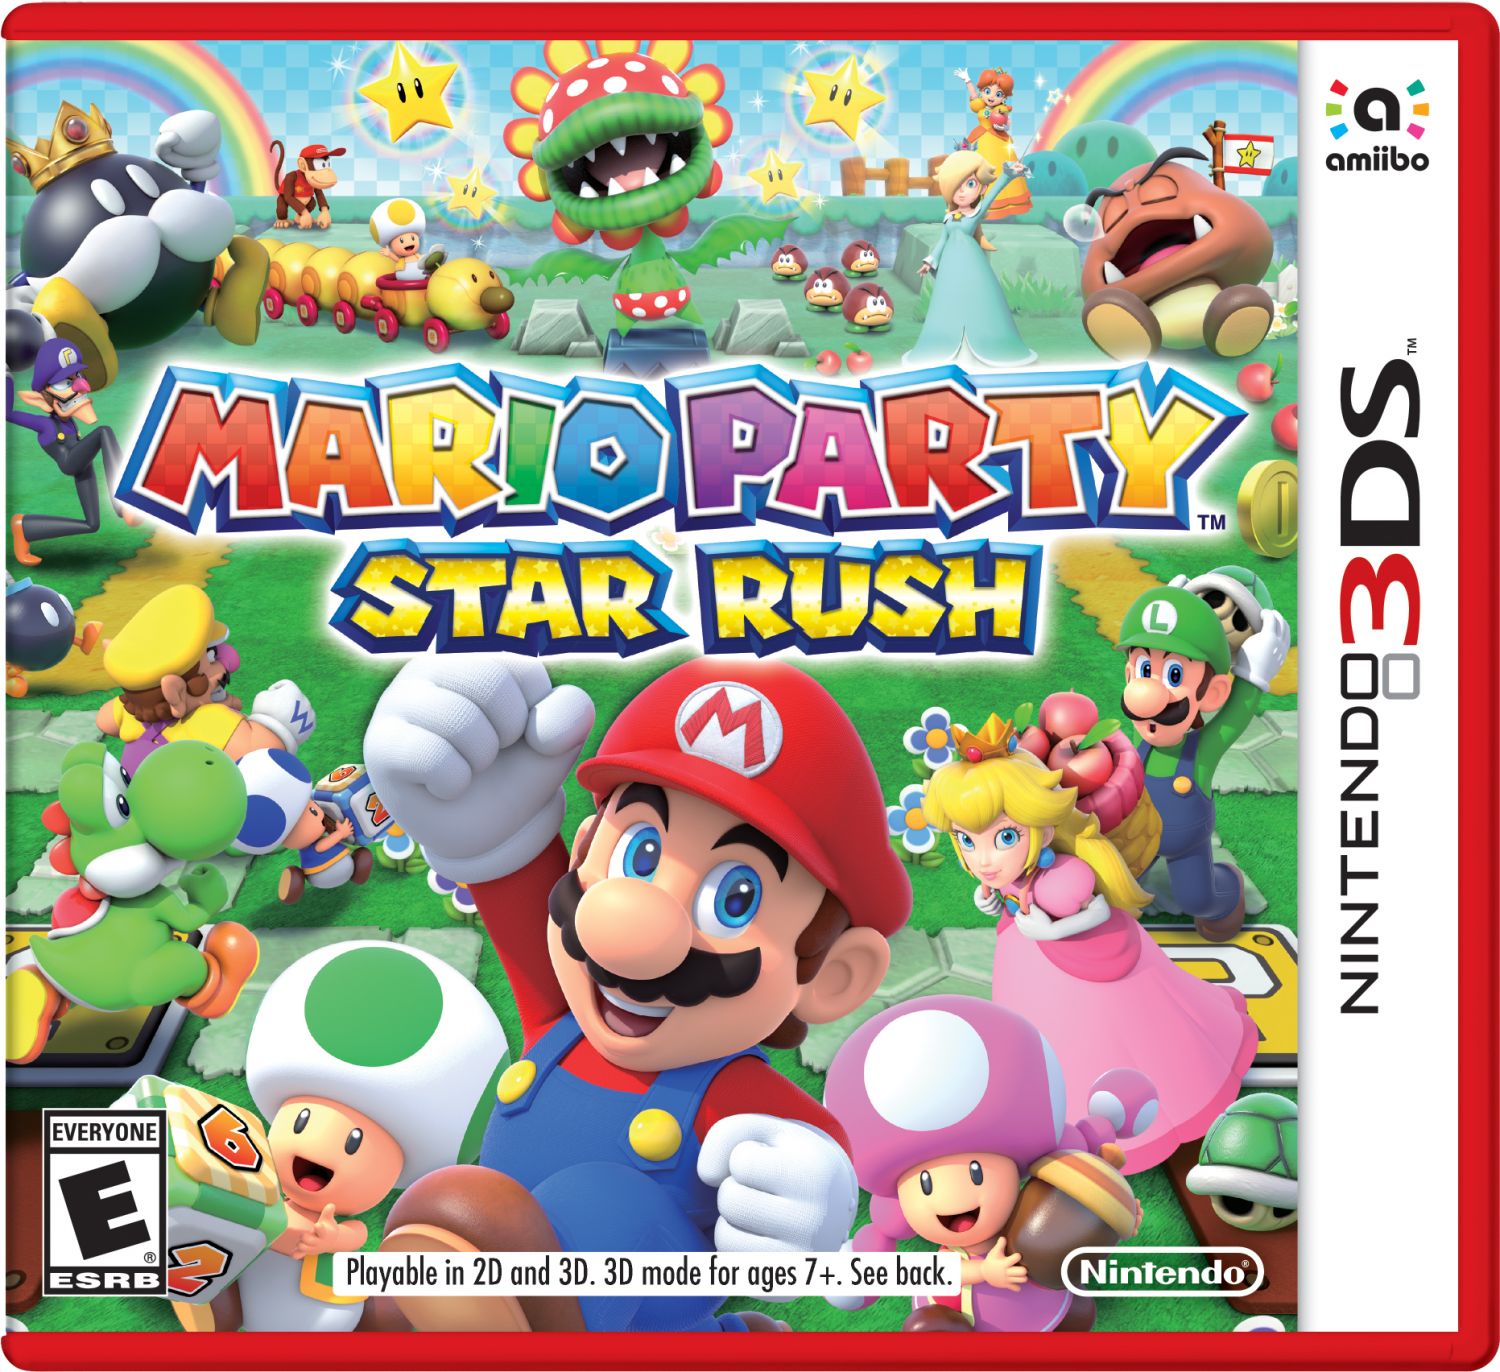 Which 3ds Mario party is better? - Mario Party: Star Rush